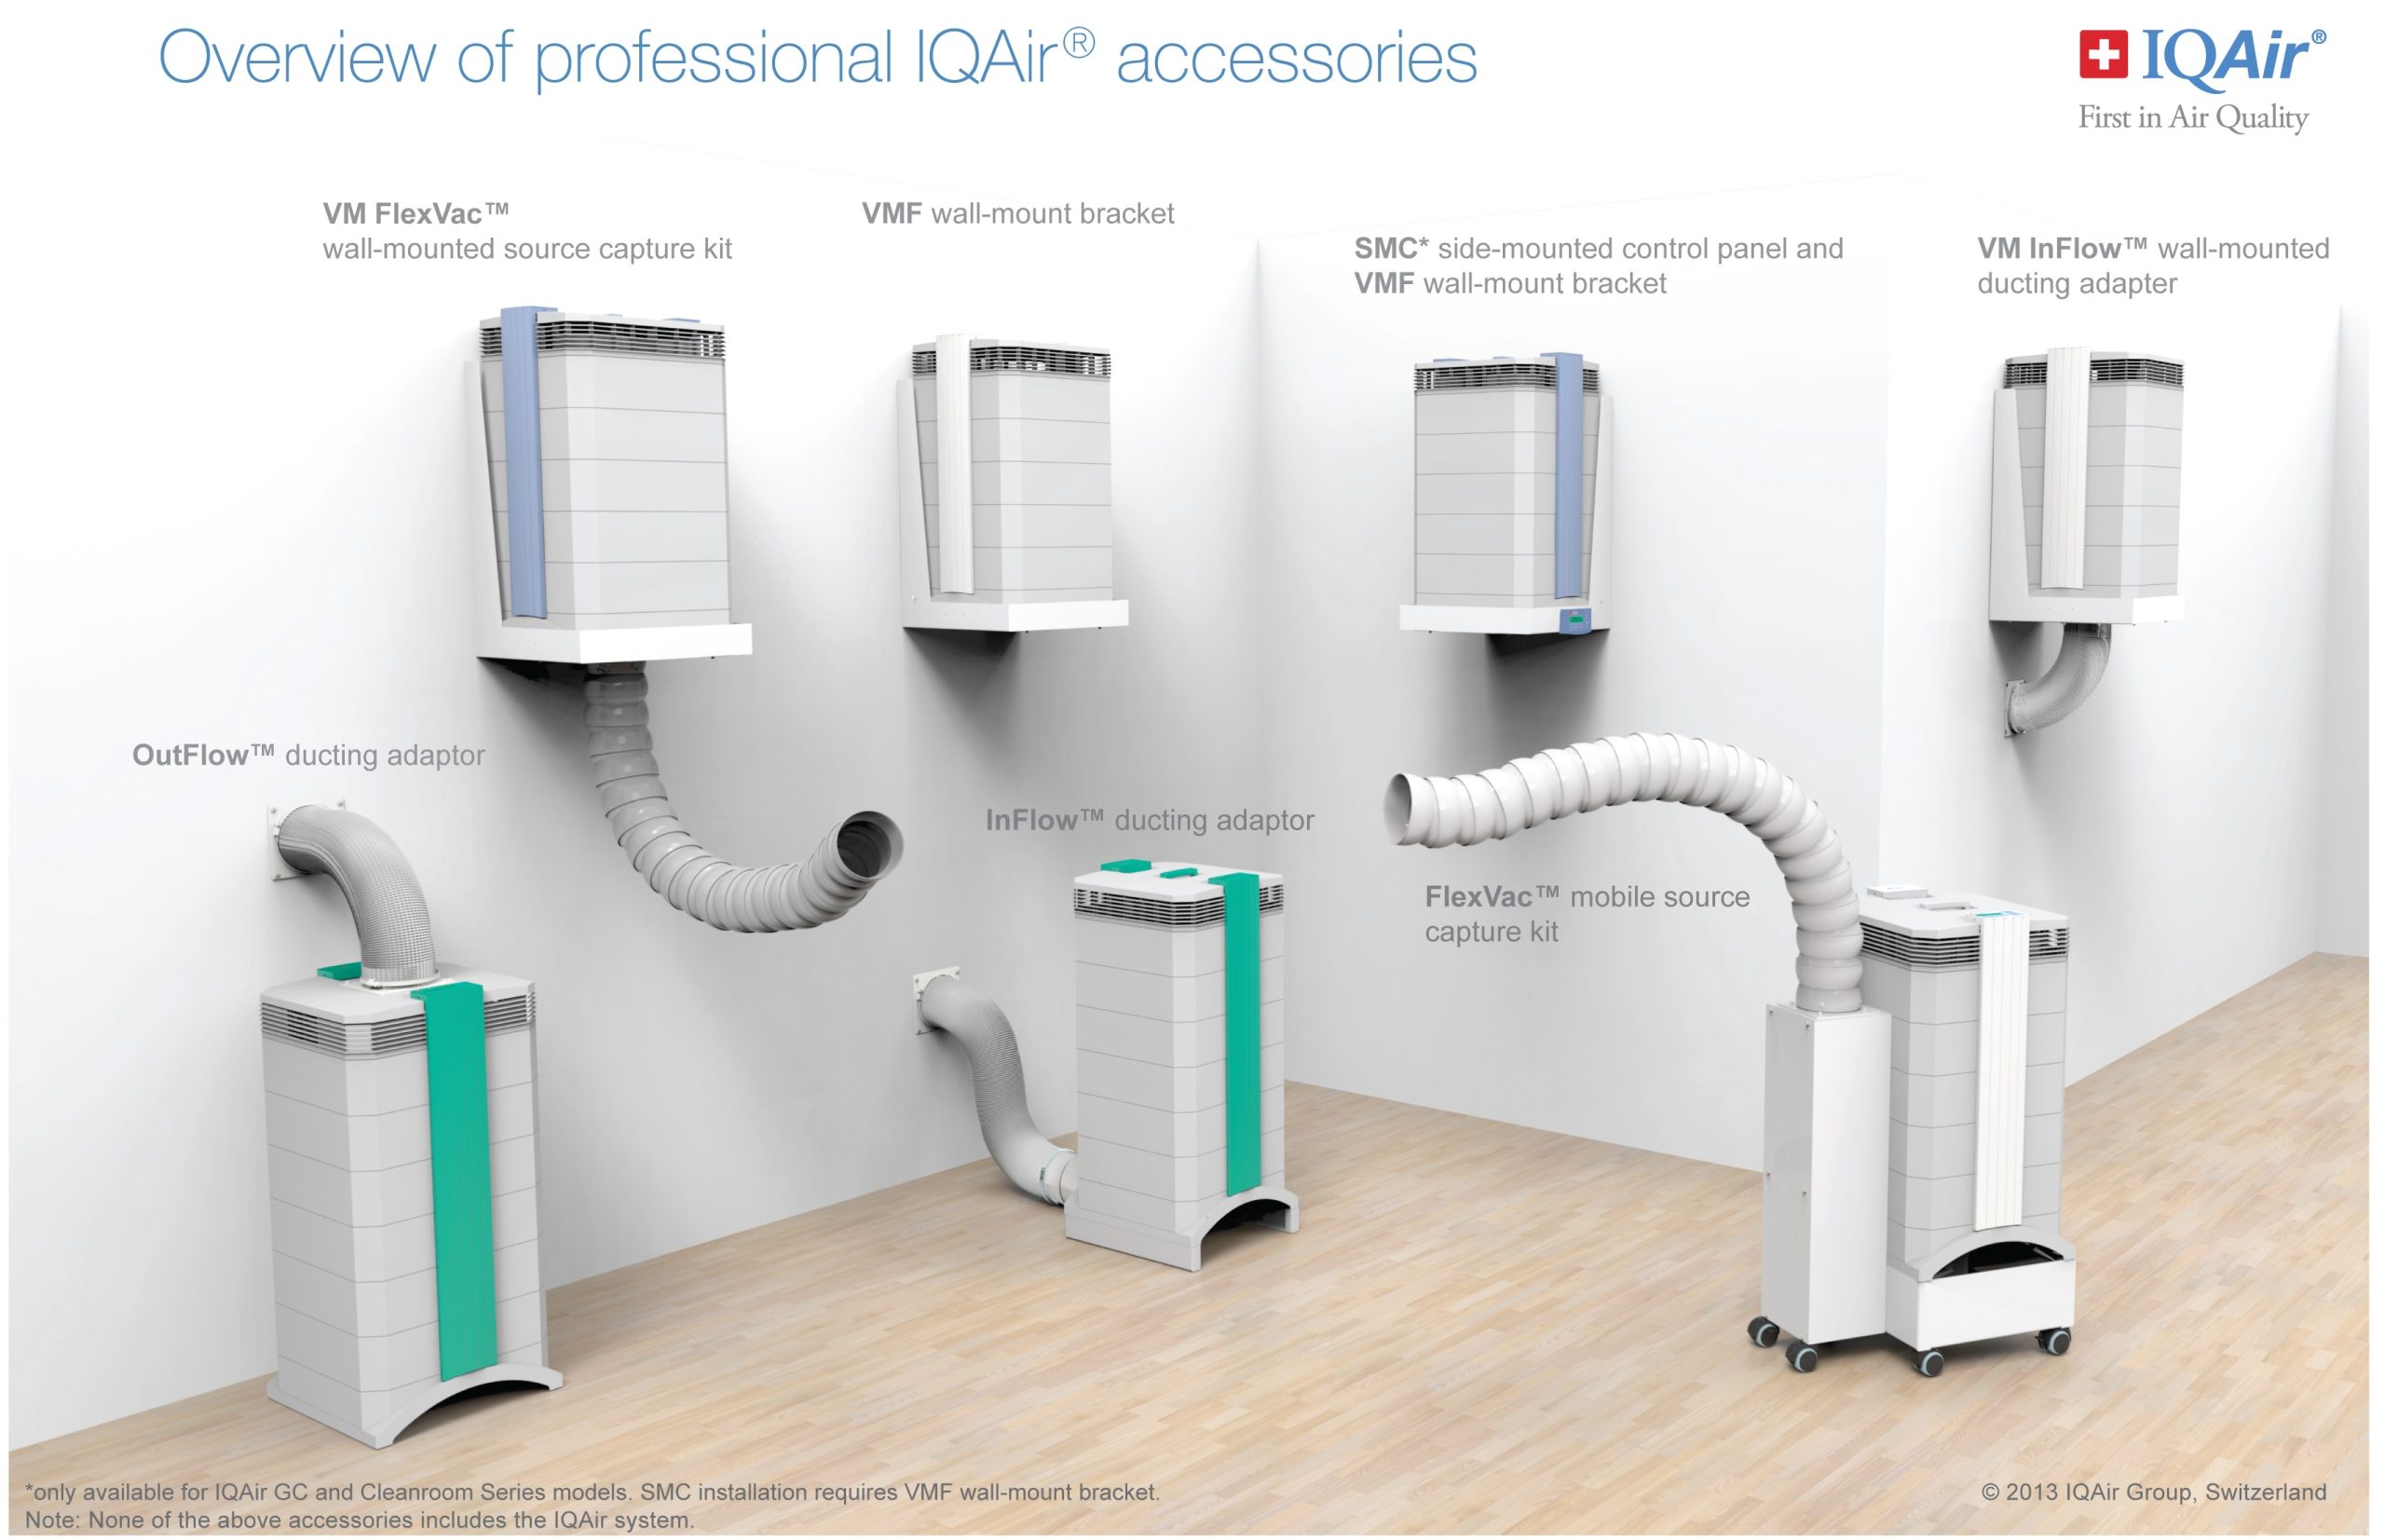 Overview of professional IQAir Accessories